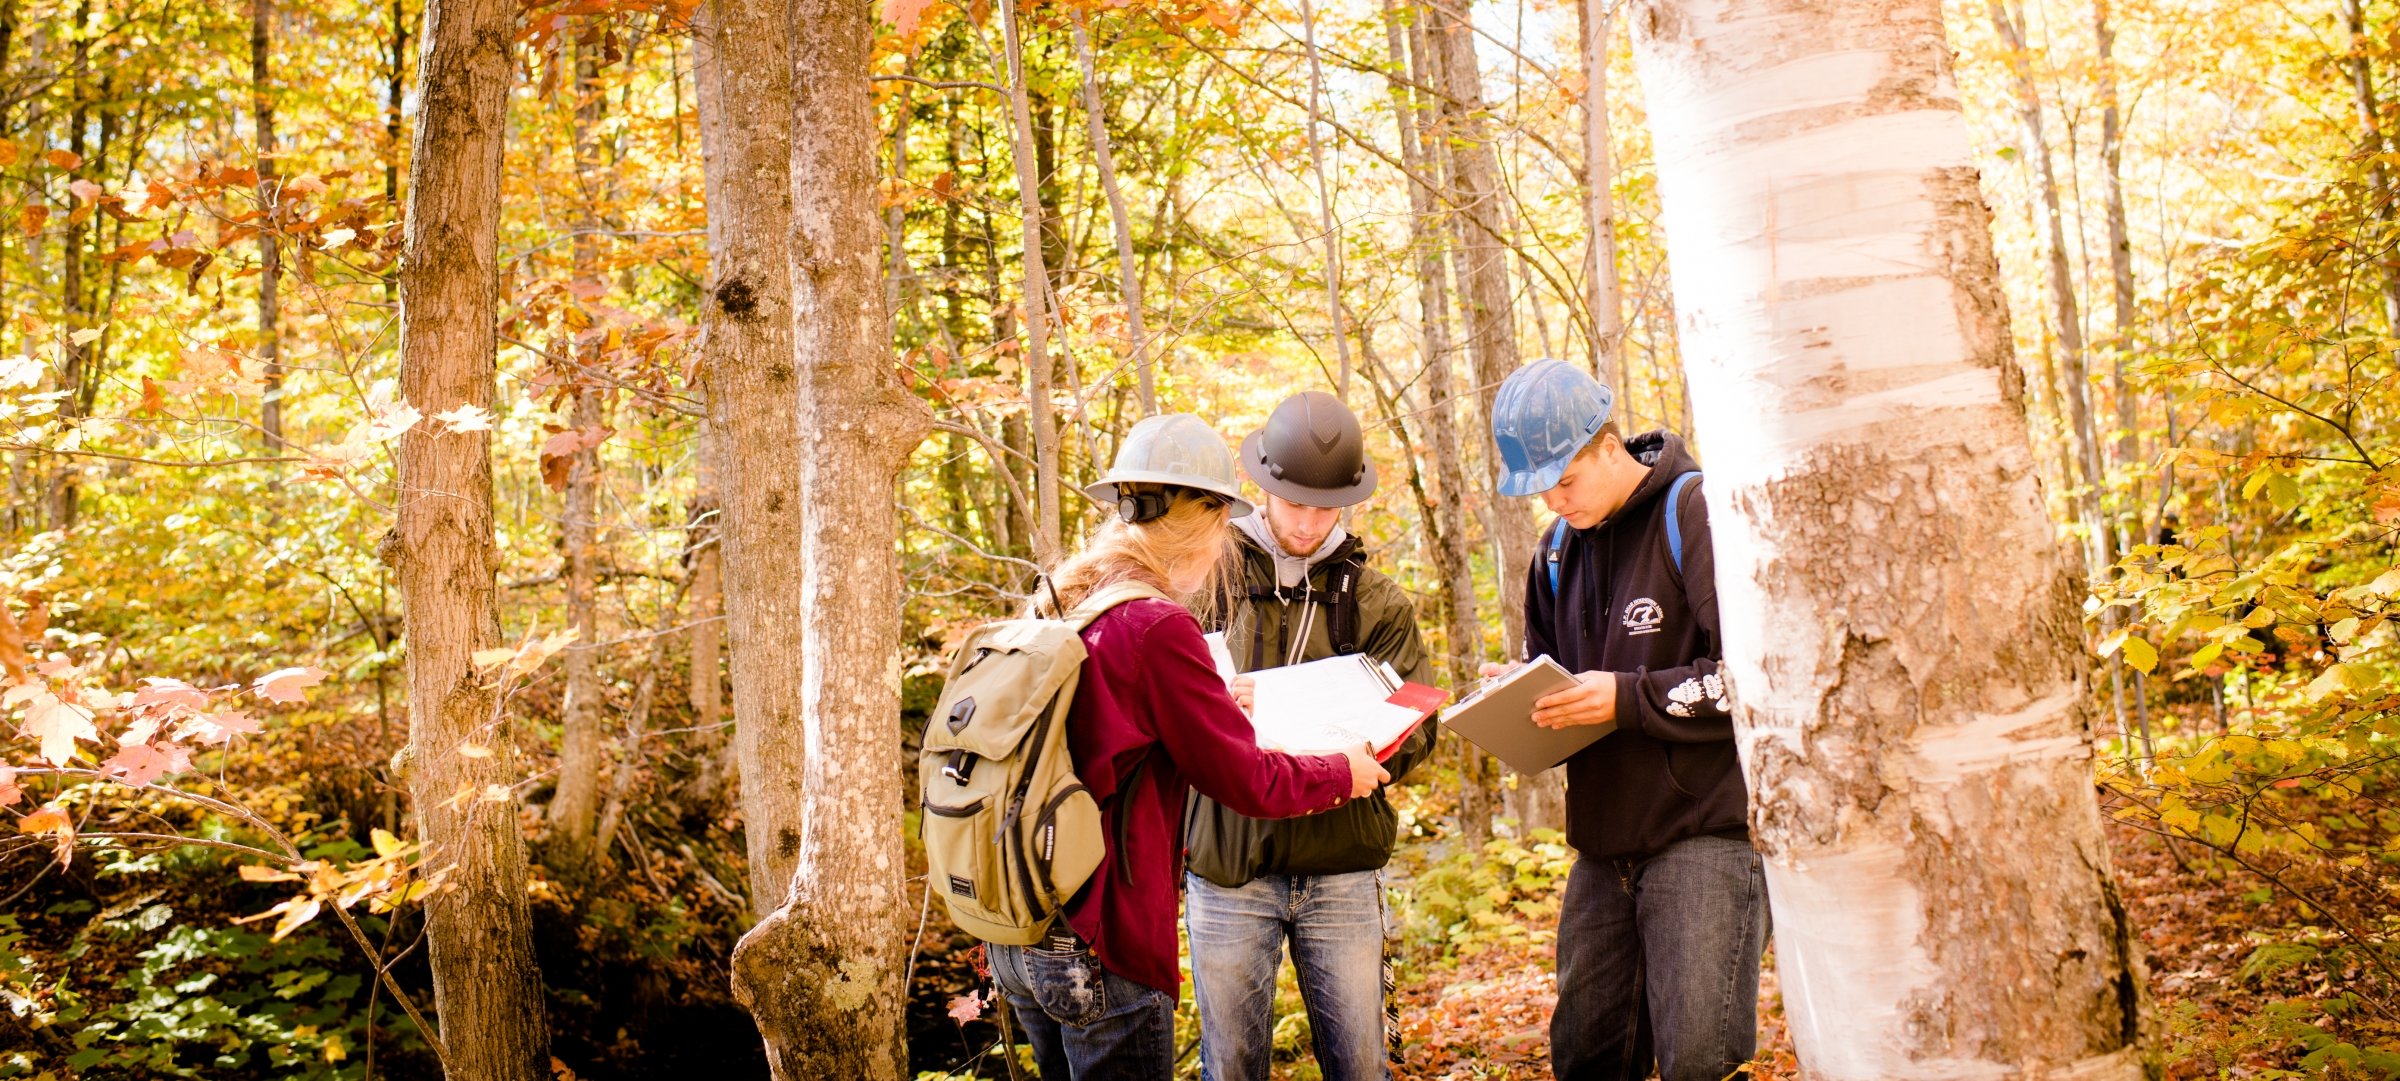 Three students with hard hats looking at clipboards in the forest.